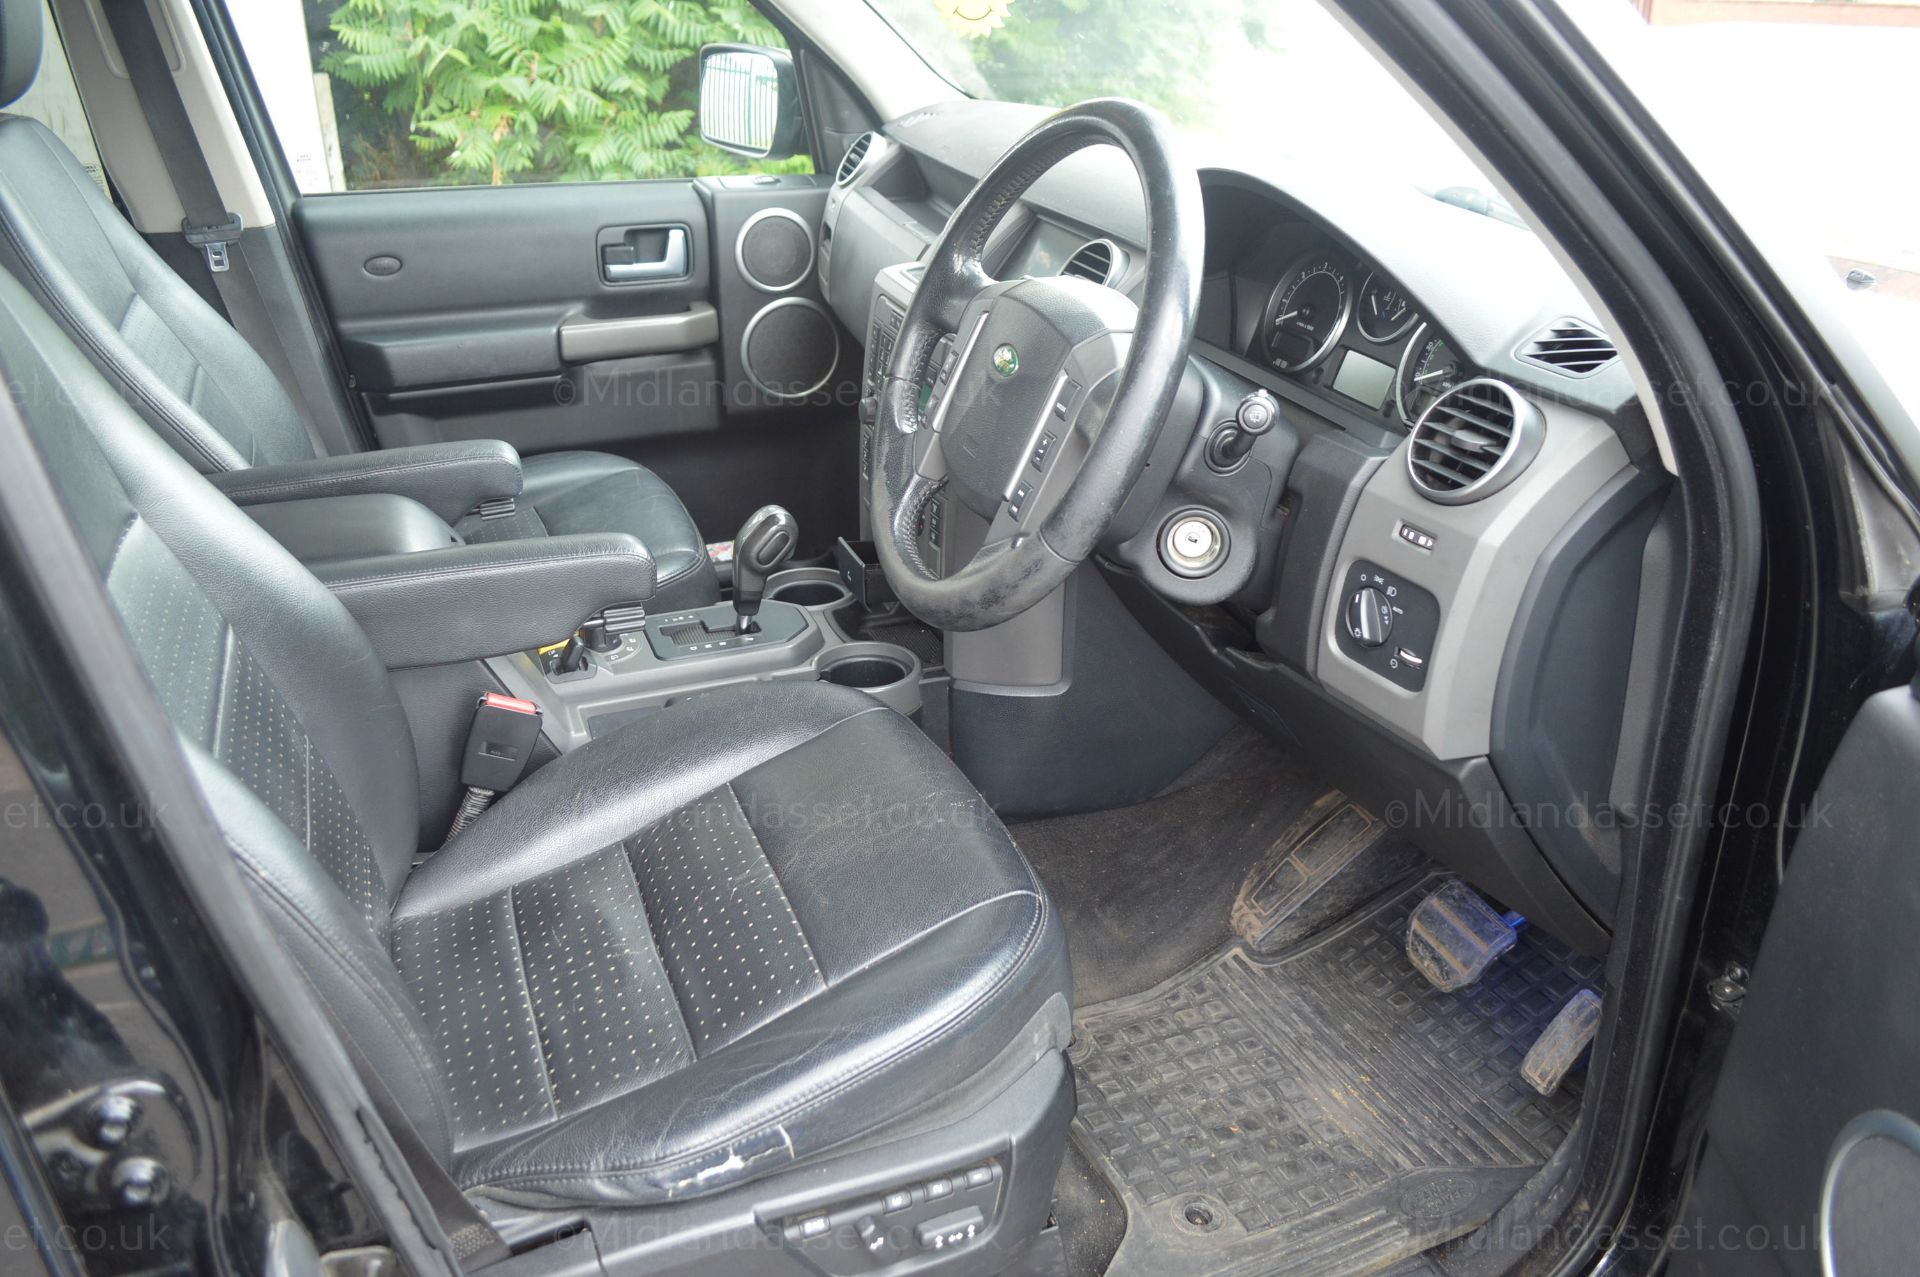 2006/56 REG LAND ROVER DISCOVERY 3 TDV6 HSE AUTO 7 SEAT SERVICE HISTORY - Image 9 of 15